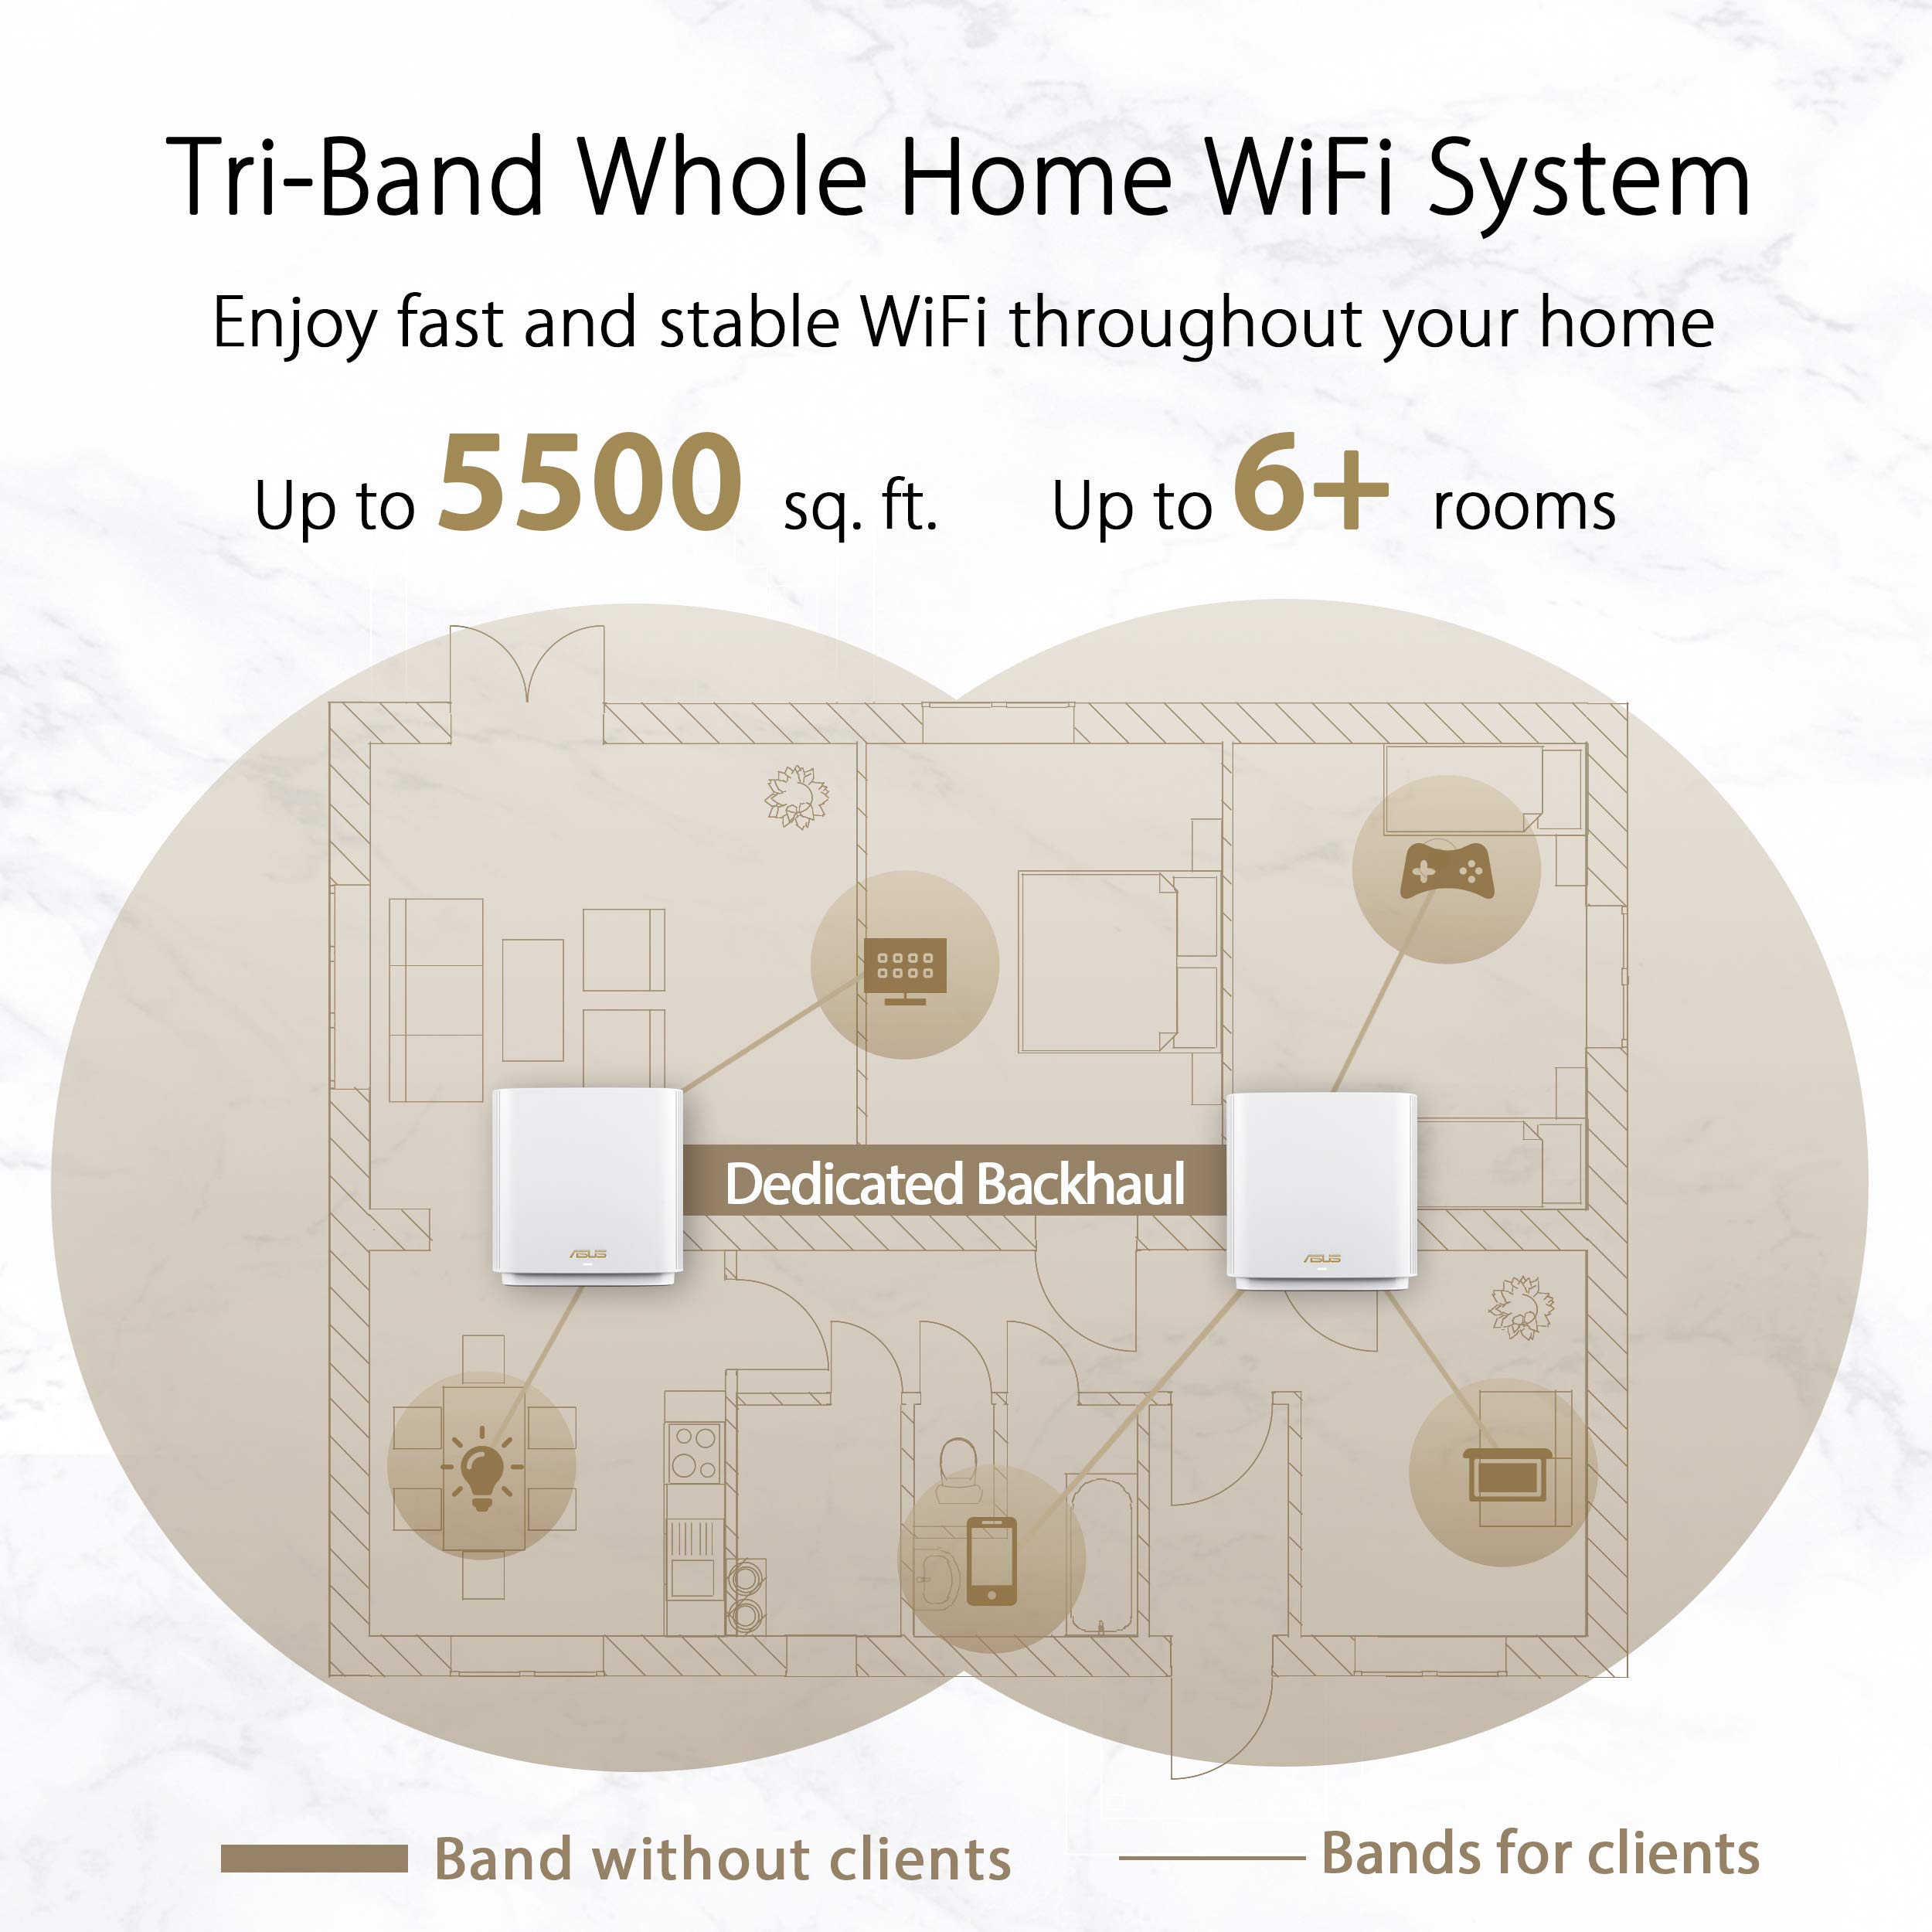 ASUS ZenWiFi AX6600 Tri-Band Mesh WiFi 6 System (XT8 2PK) - Whole Home Coverage up to 5500 sq.ft & 6+ rooms, AiMesh, Included Lifetime Internet Security, Easy Setup, 3 SSID, Parental Control, White